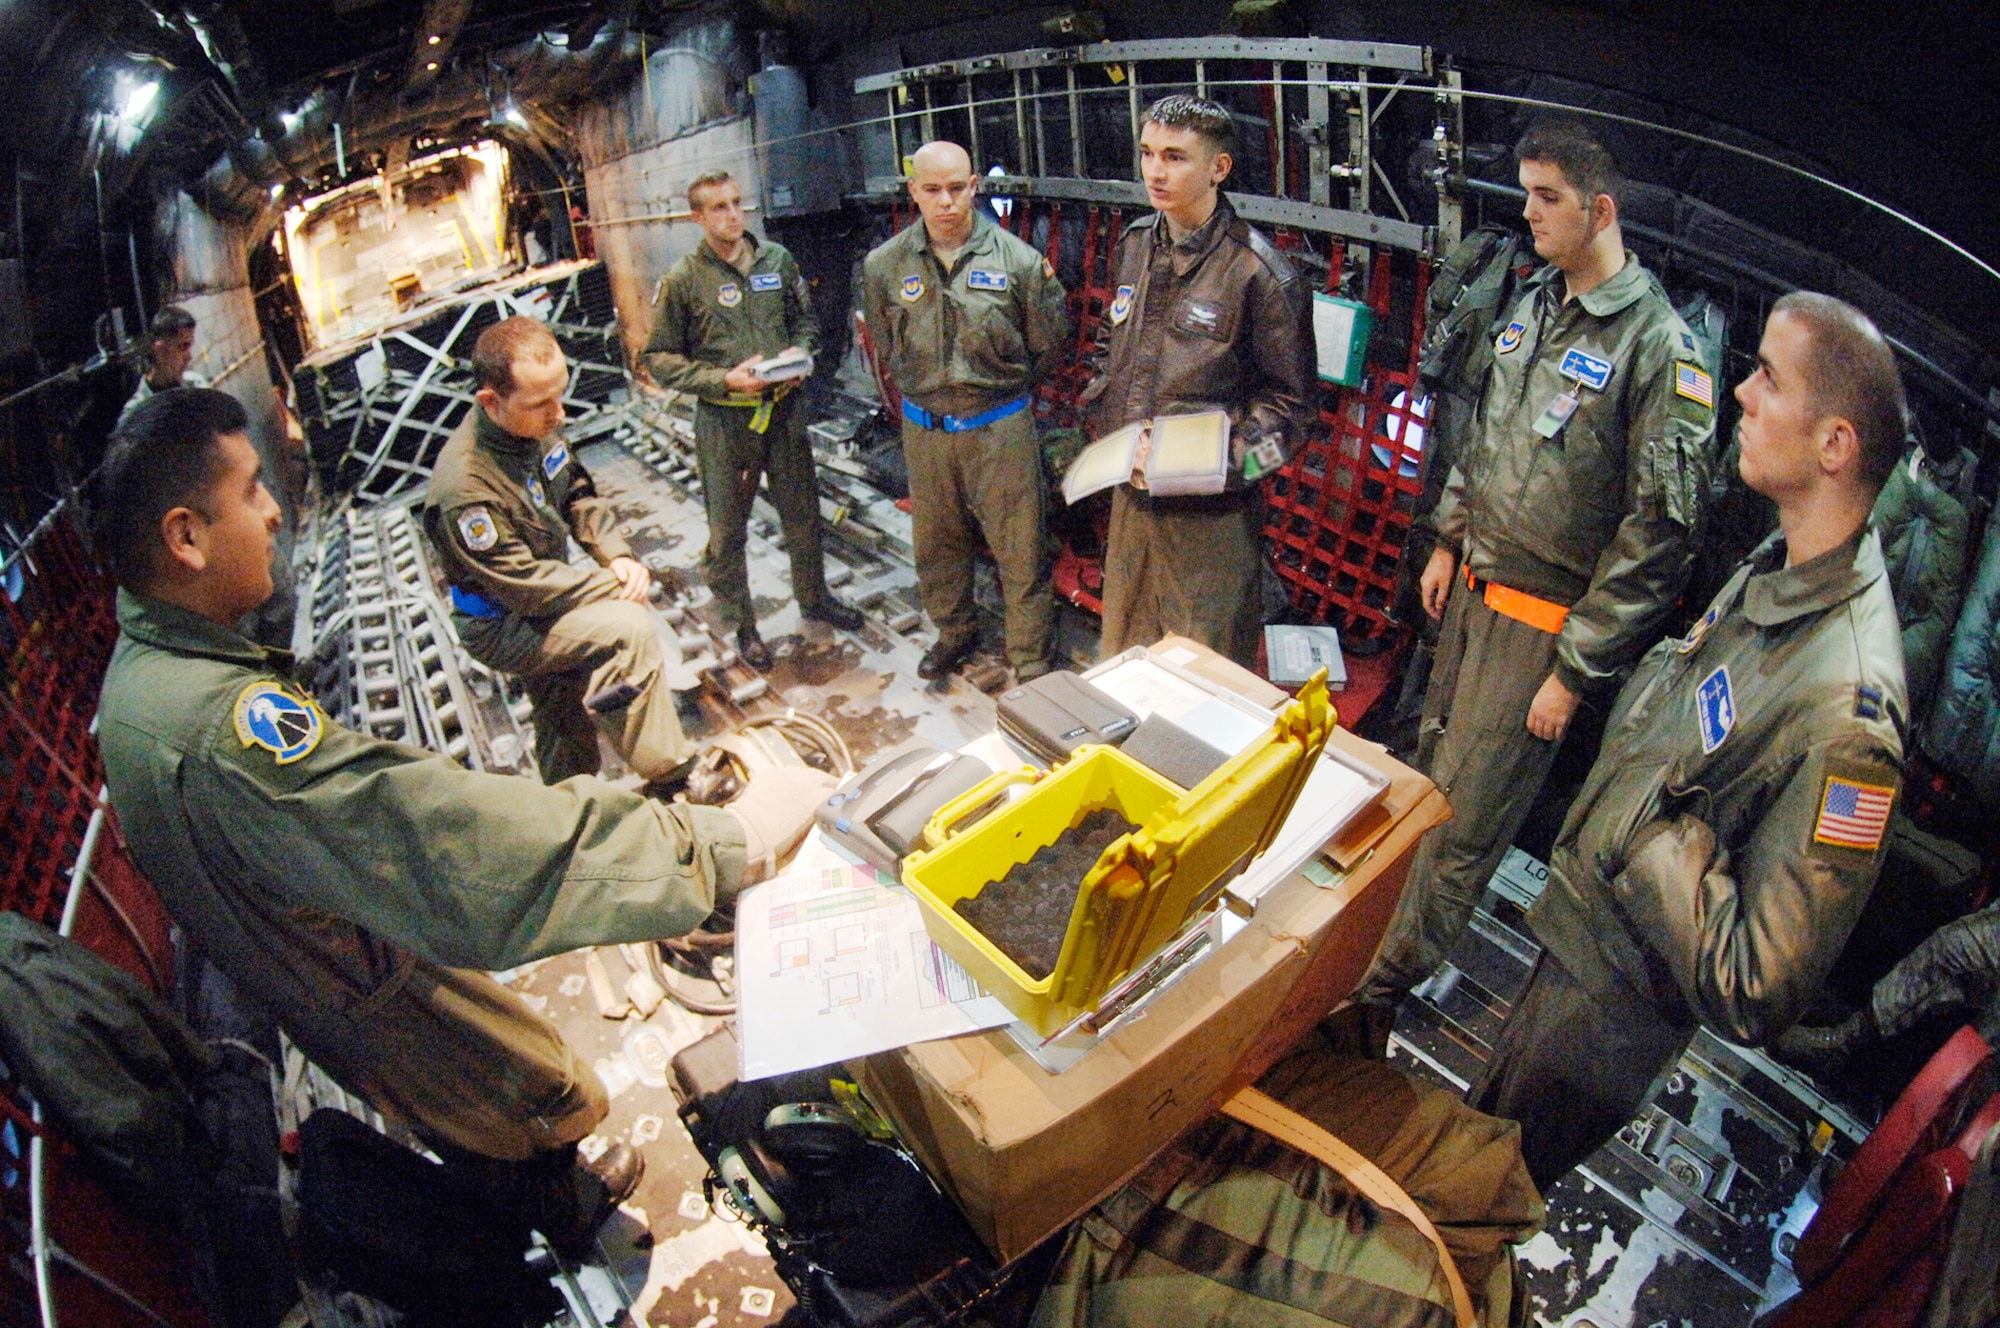 Capt. Tyler Robertson (in a leather jacket) leads a mission brief for (right to left) Capt. Matthieu Rigollet, Capt. Ryan Donohoe, Staff Sgt. Eric Kleser, Capt. Matt Schoomaker, Staff Sgt. Josh Woolridge and Staff Sgt. Victor Reynosa discuss their C-130 Hercules mission Nov. 2, 2009. The aircraft was transferred to the Polish air force's 14th Airlift Squadron at Powidz Air Base, Poland, as part of a program for building partnership capacities between the United States and its allies. Captain Robertson is an aircraft commander, Captain Rigollet is a mission navigator, Captain Donohoe is an instructor navigator, Sergeant Kleser is a flight engineer, Captain Schoomaker is a co-pilot, and Sergeants Woolridge and Reynosa are loadmasters. (Defense Department photo/Master Sgt. Scott Wagers)